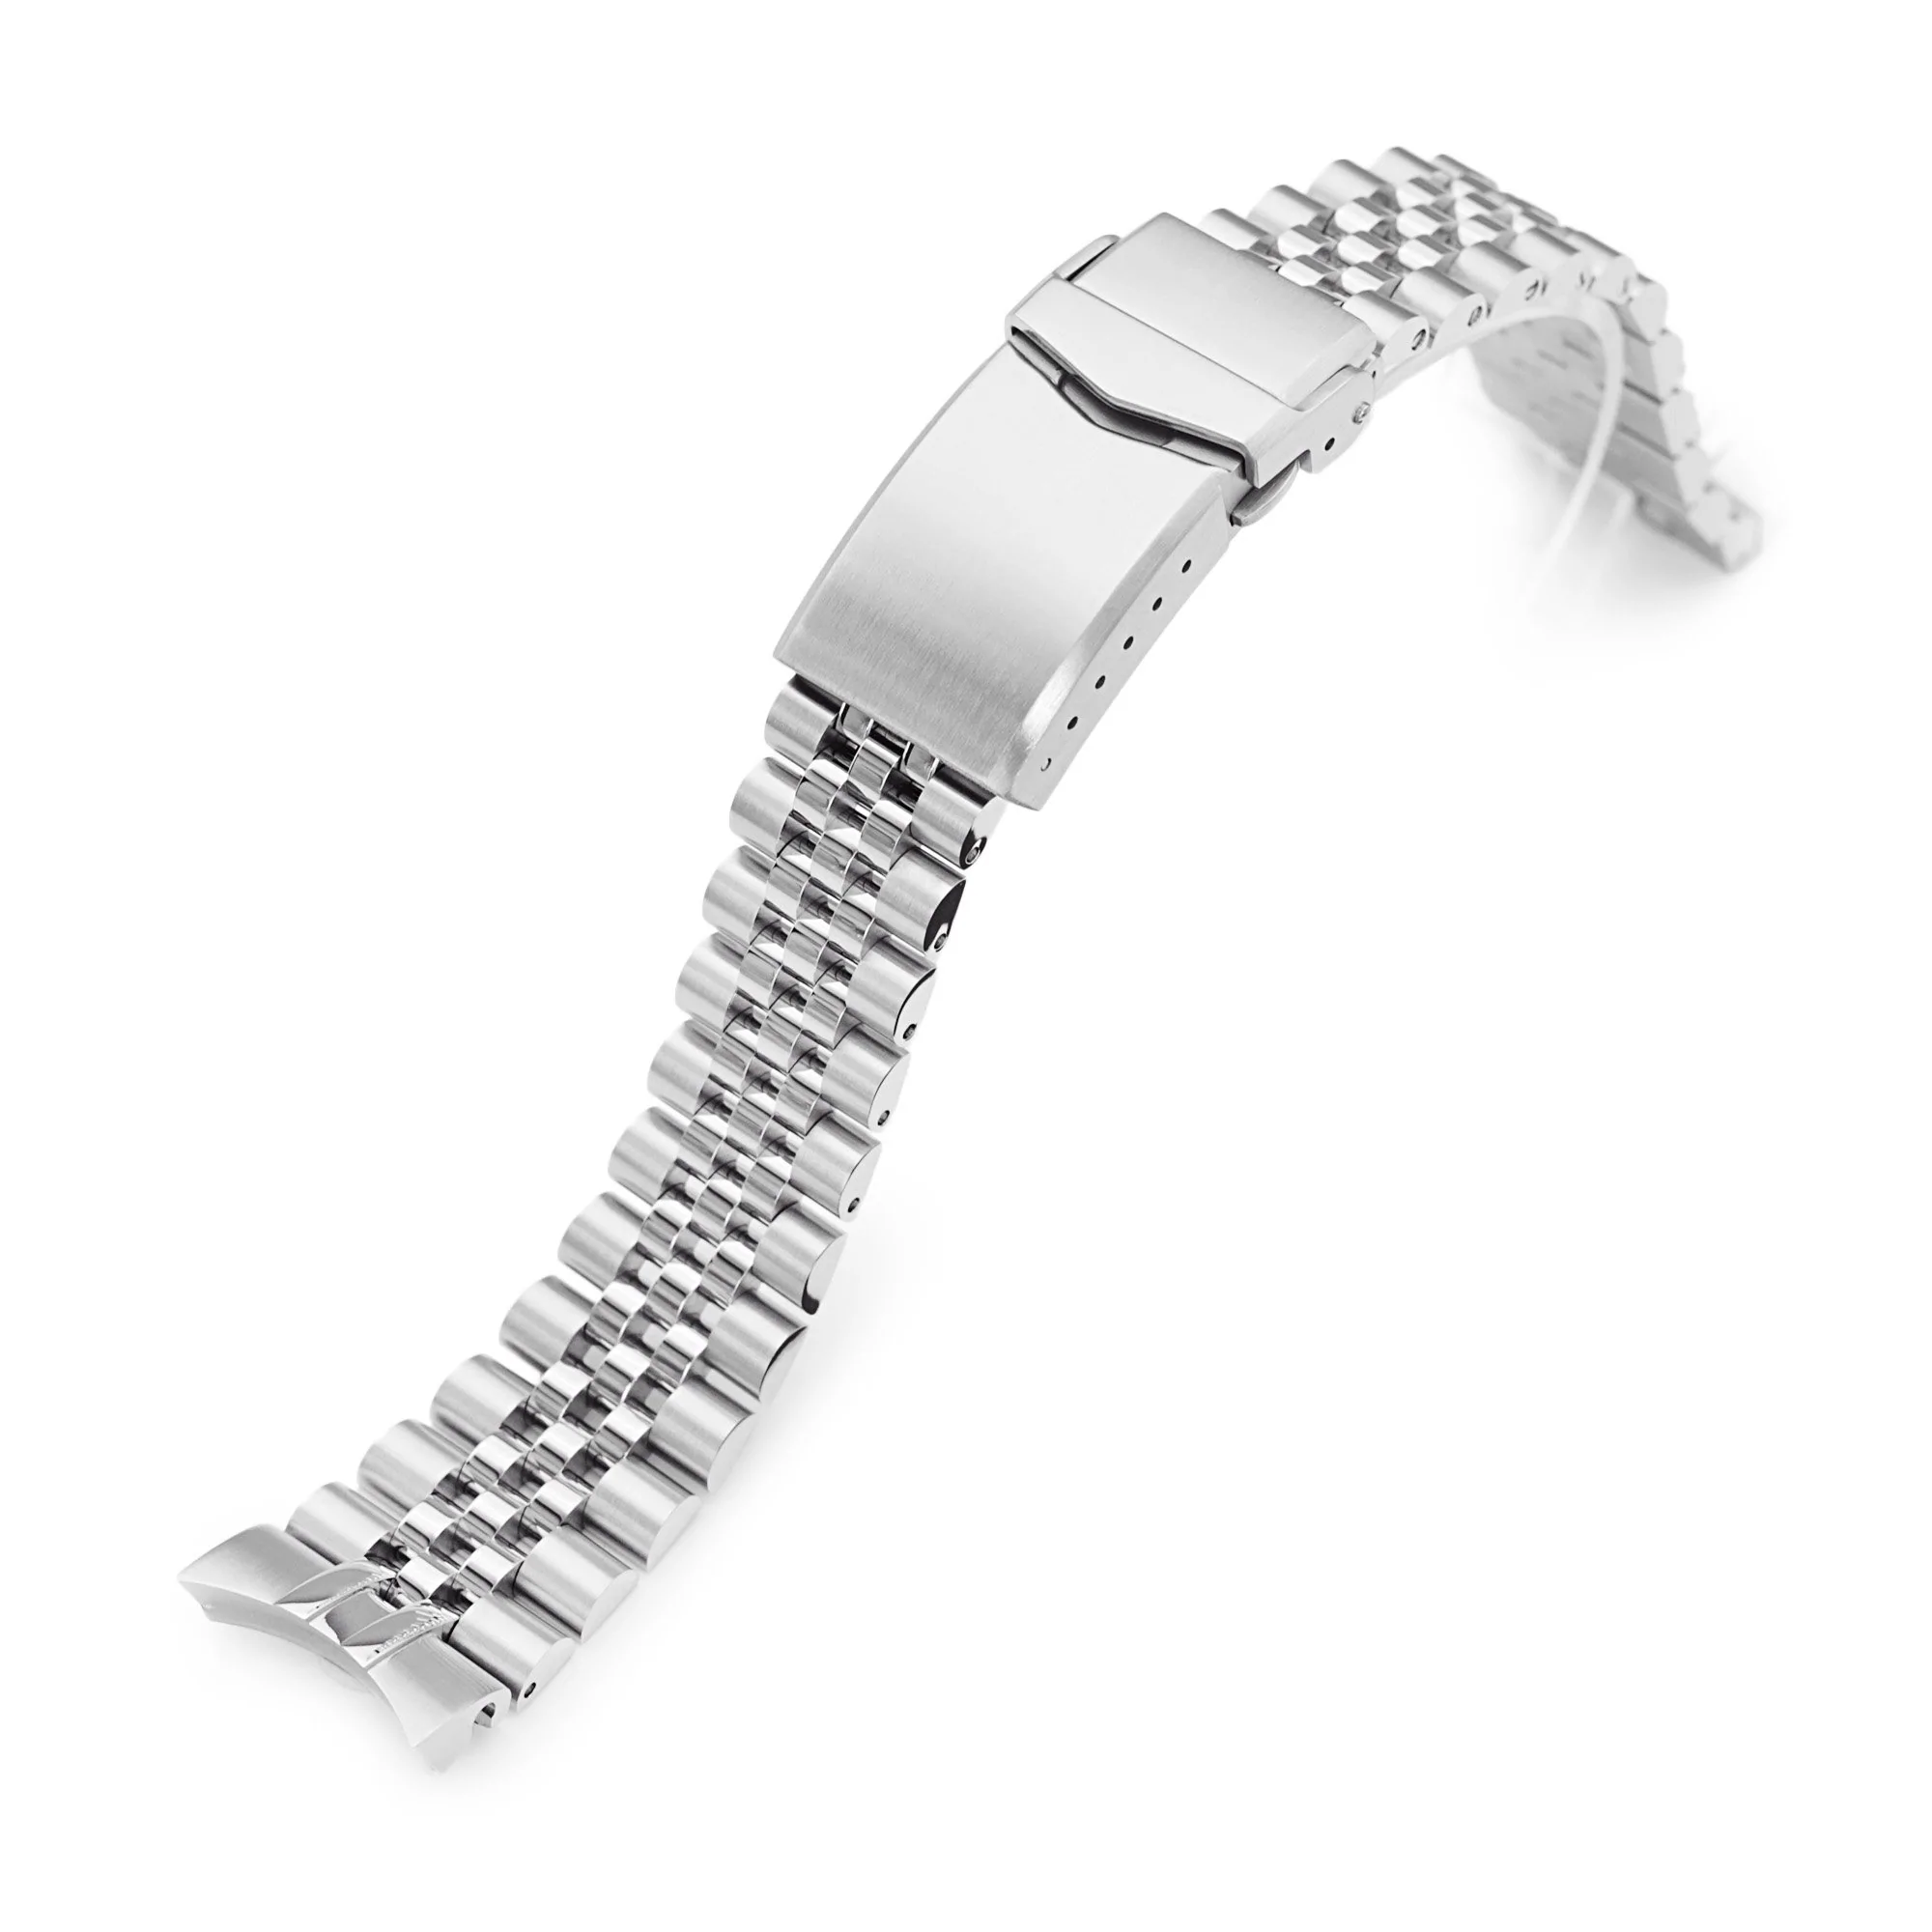 20mm Super-JUB II Watch Band compatible with Seiko Alpinist SARB017, 3 –  Russell Jewellers